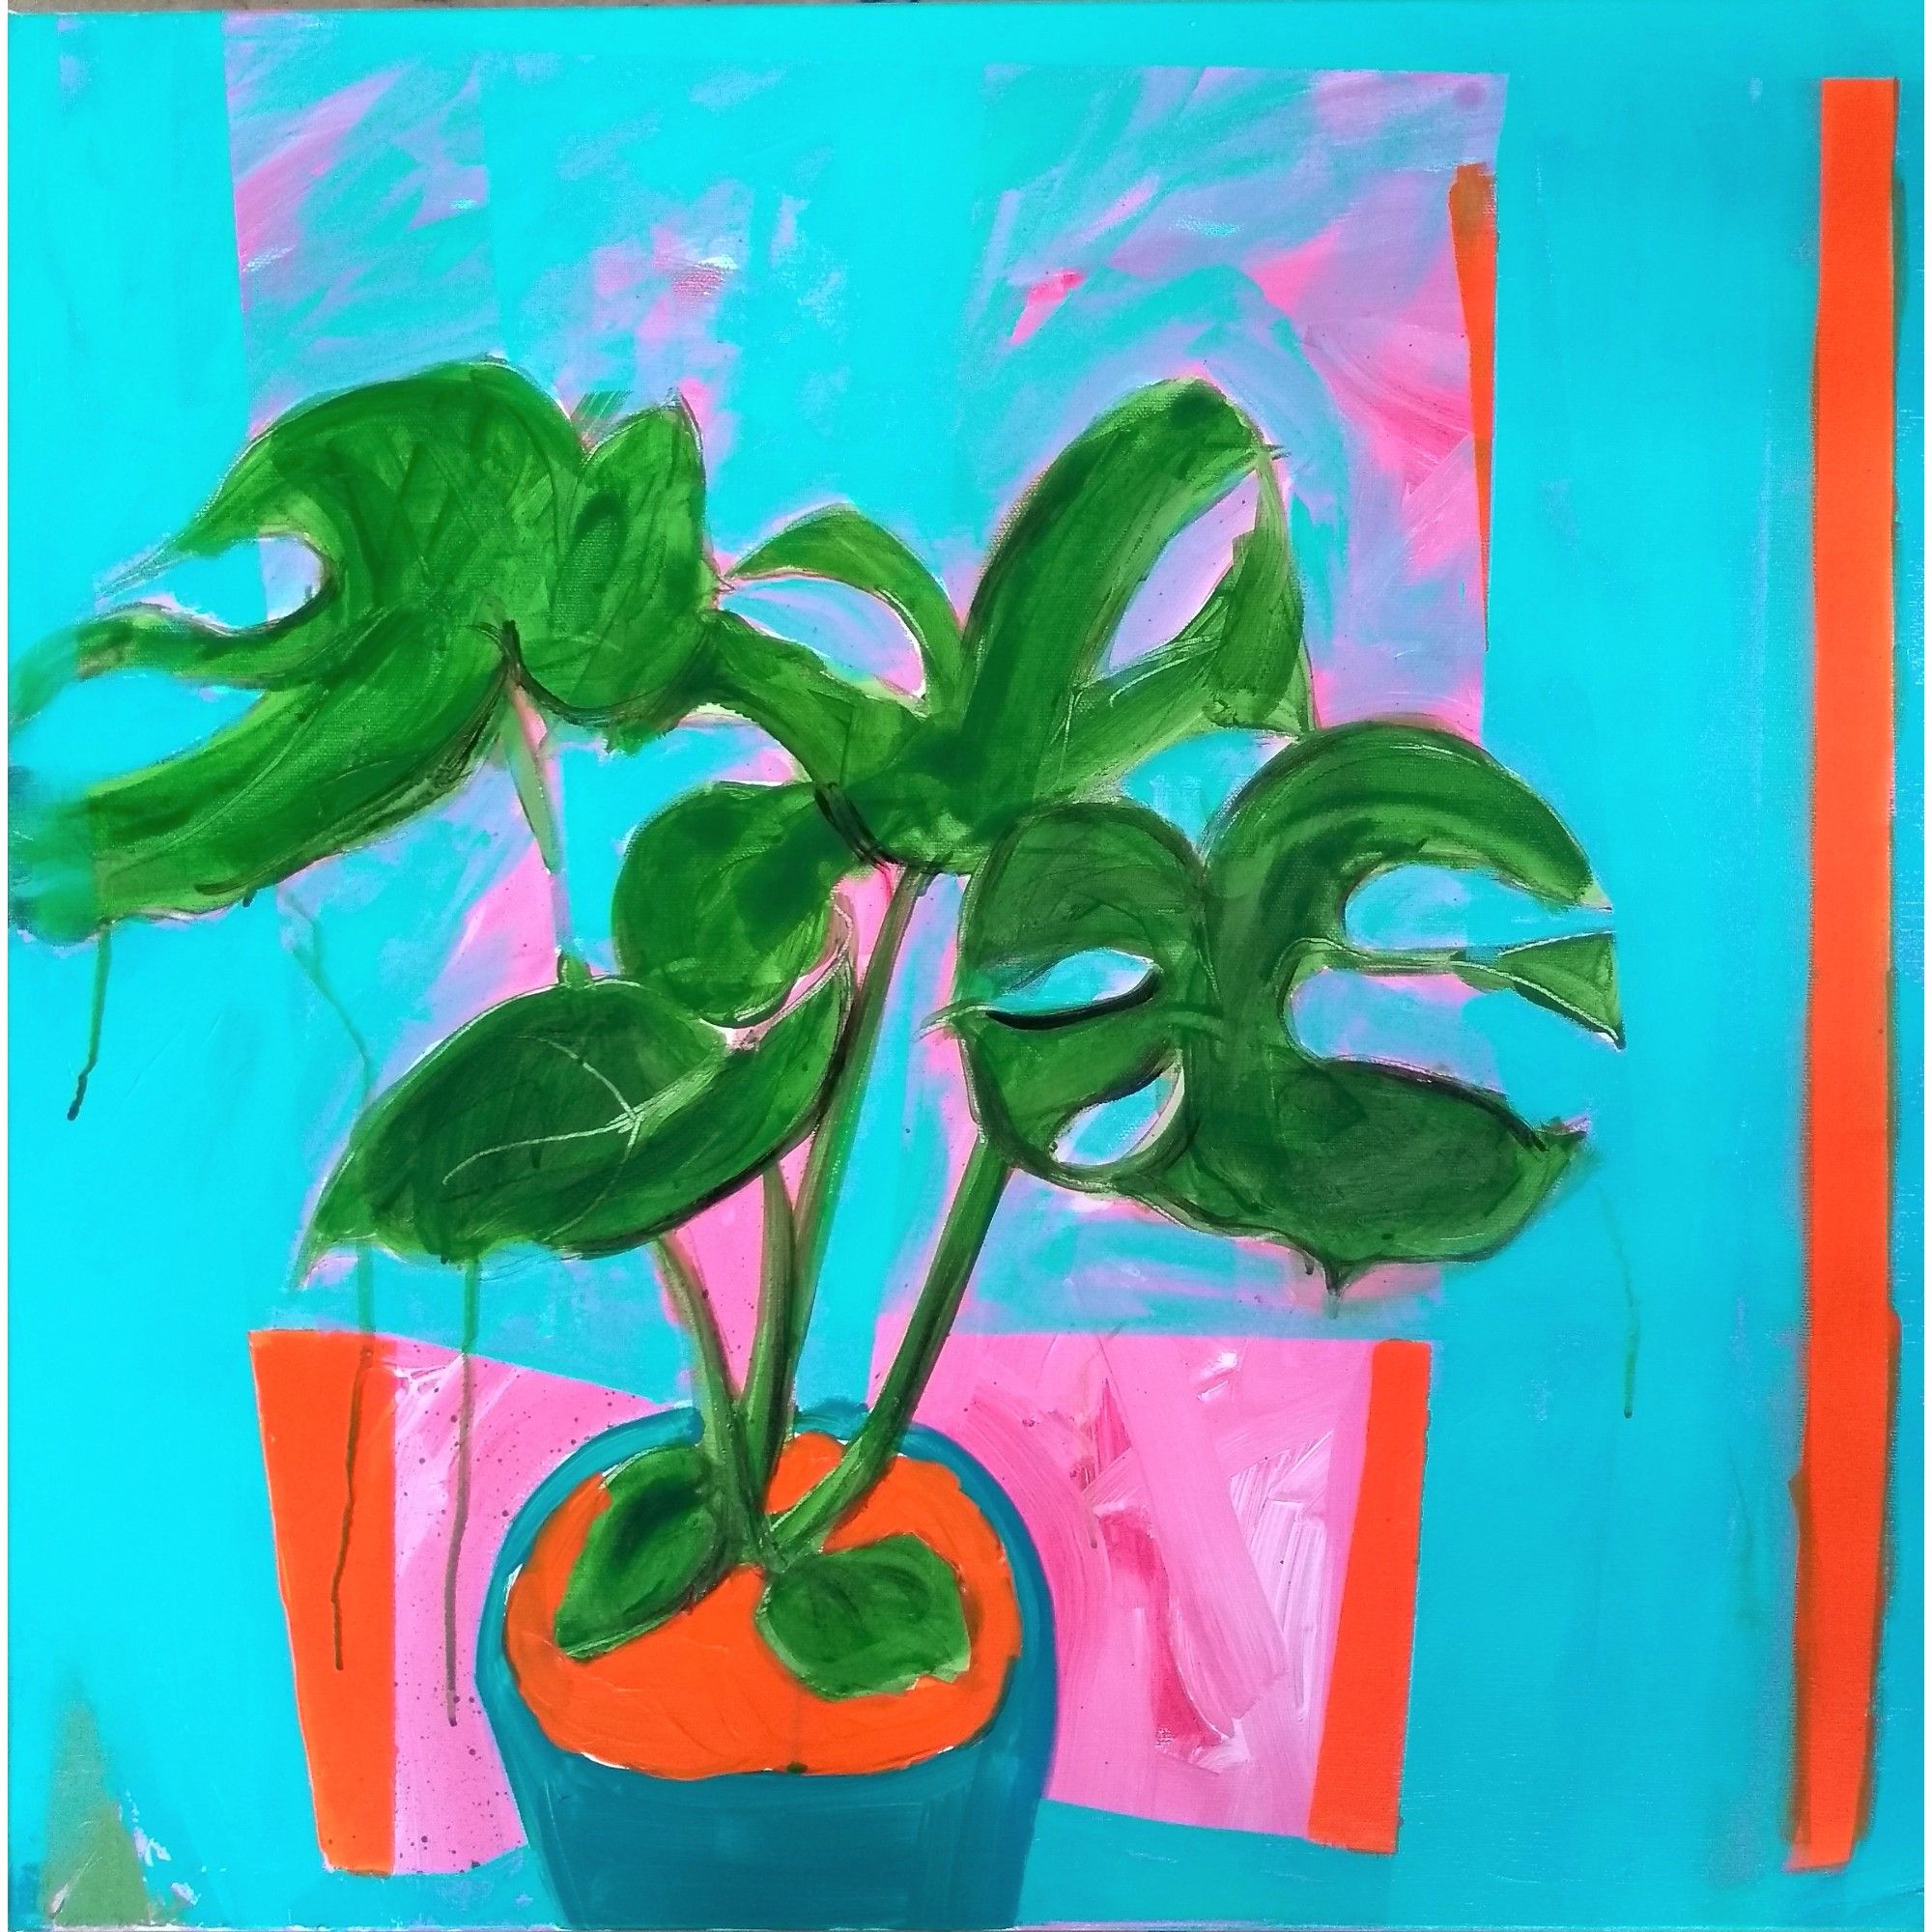 Cheese Plant by Liese Webley